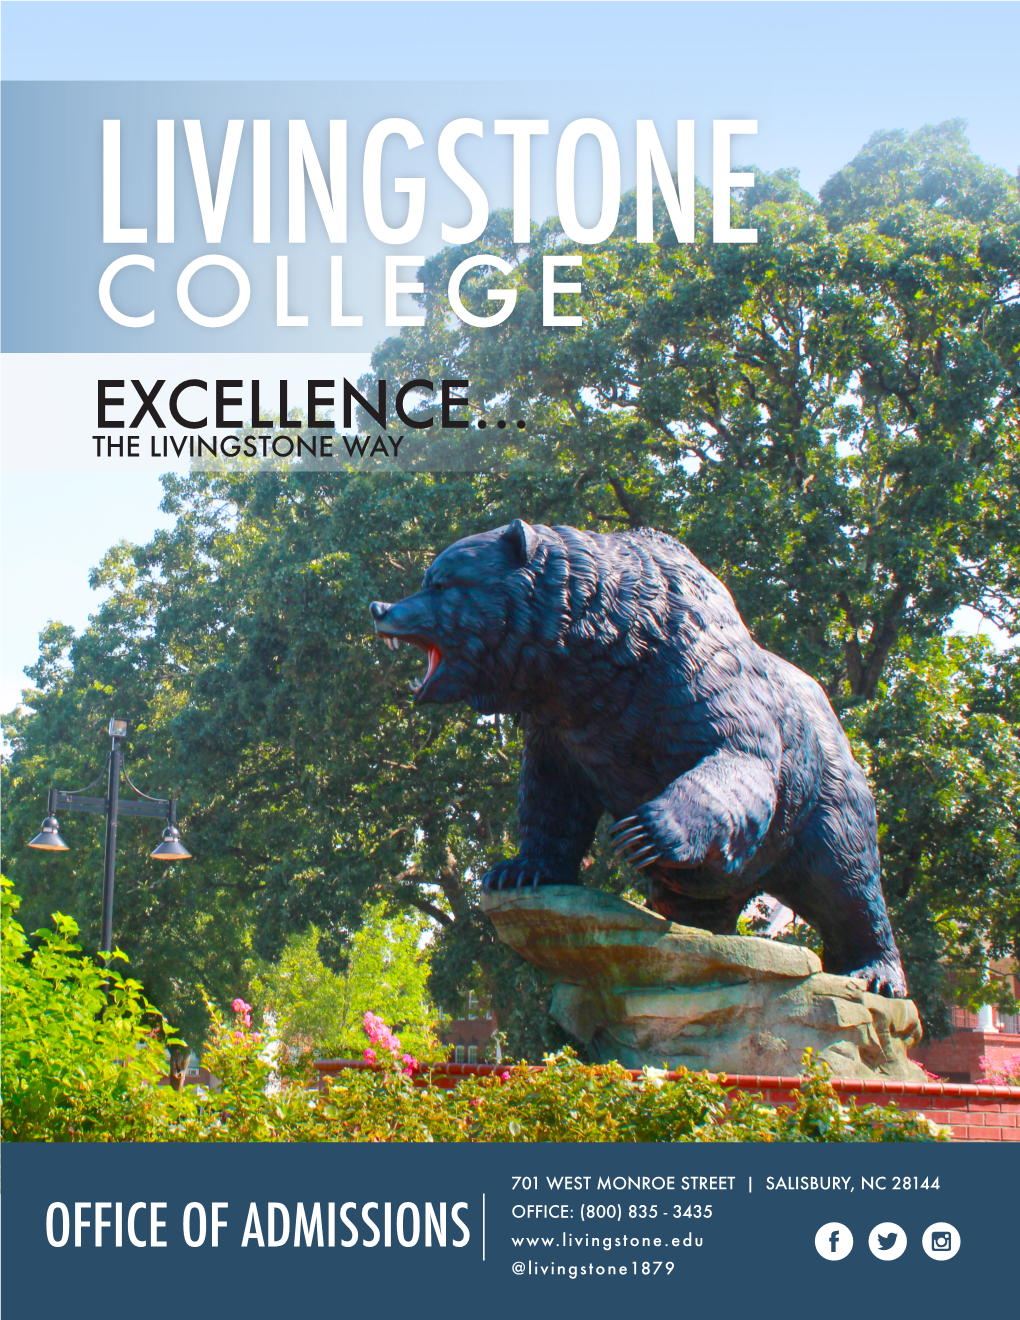 Excellence... the Livingstone Way